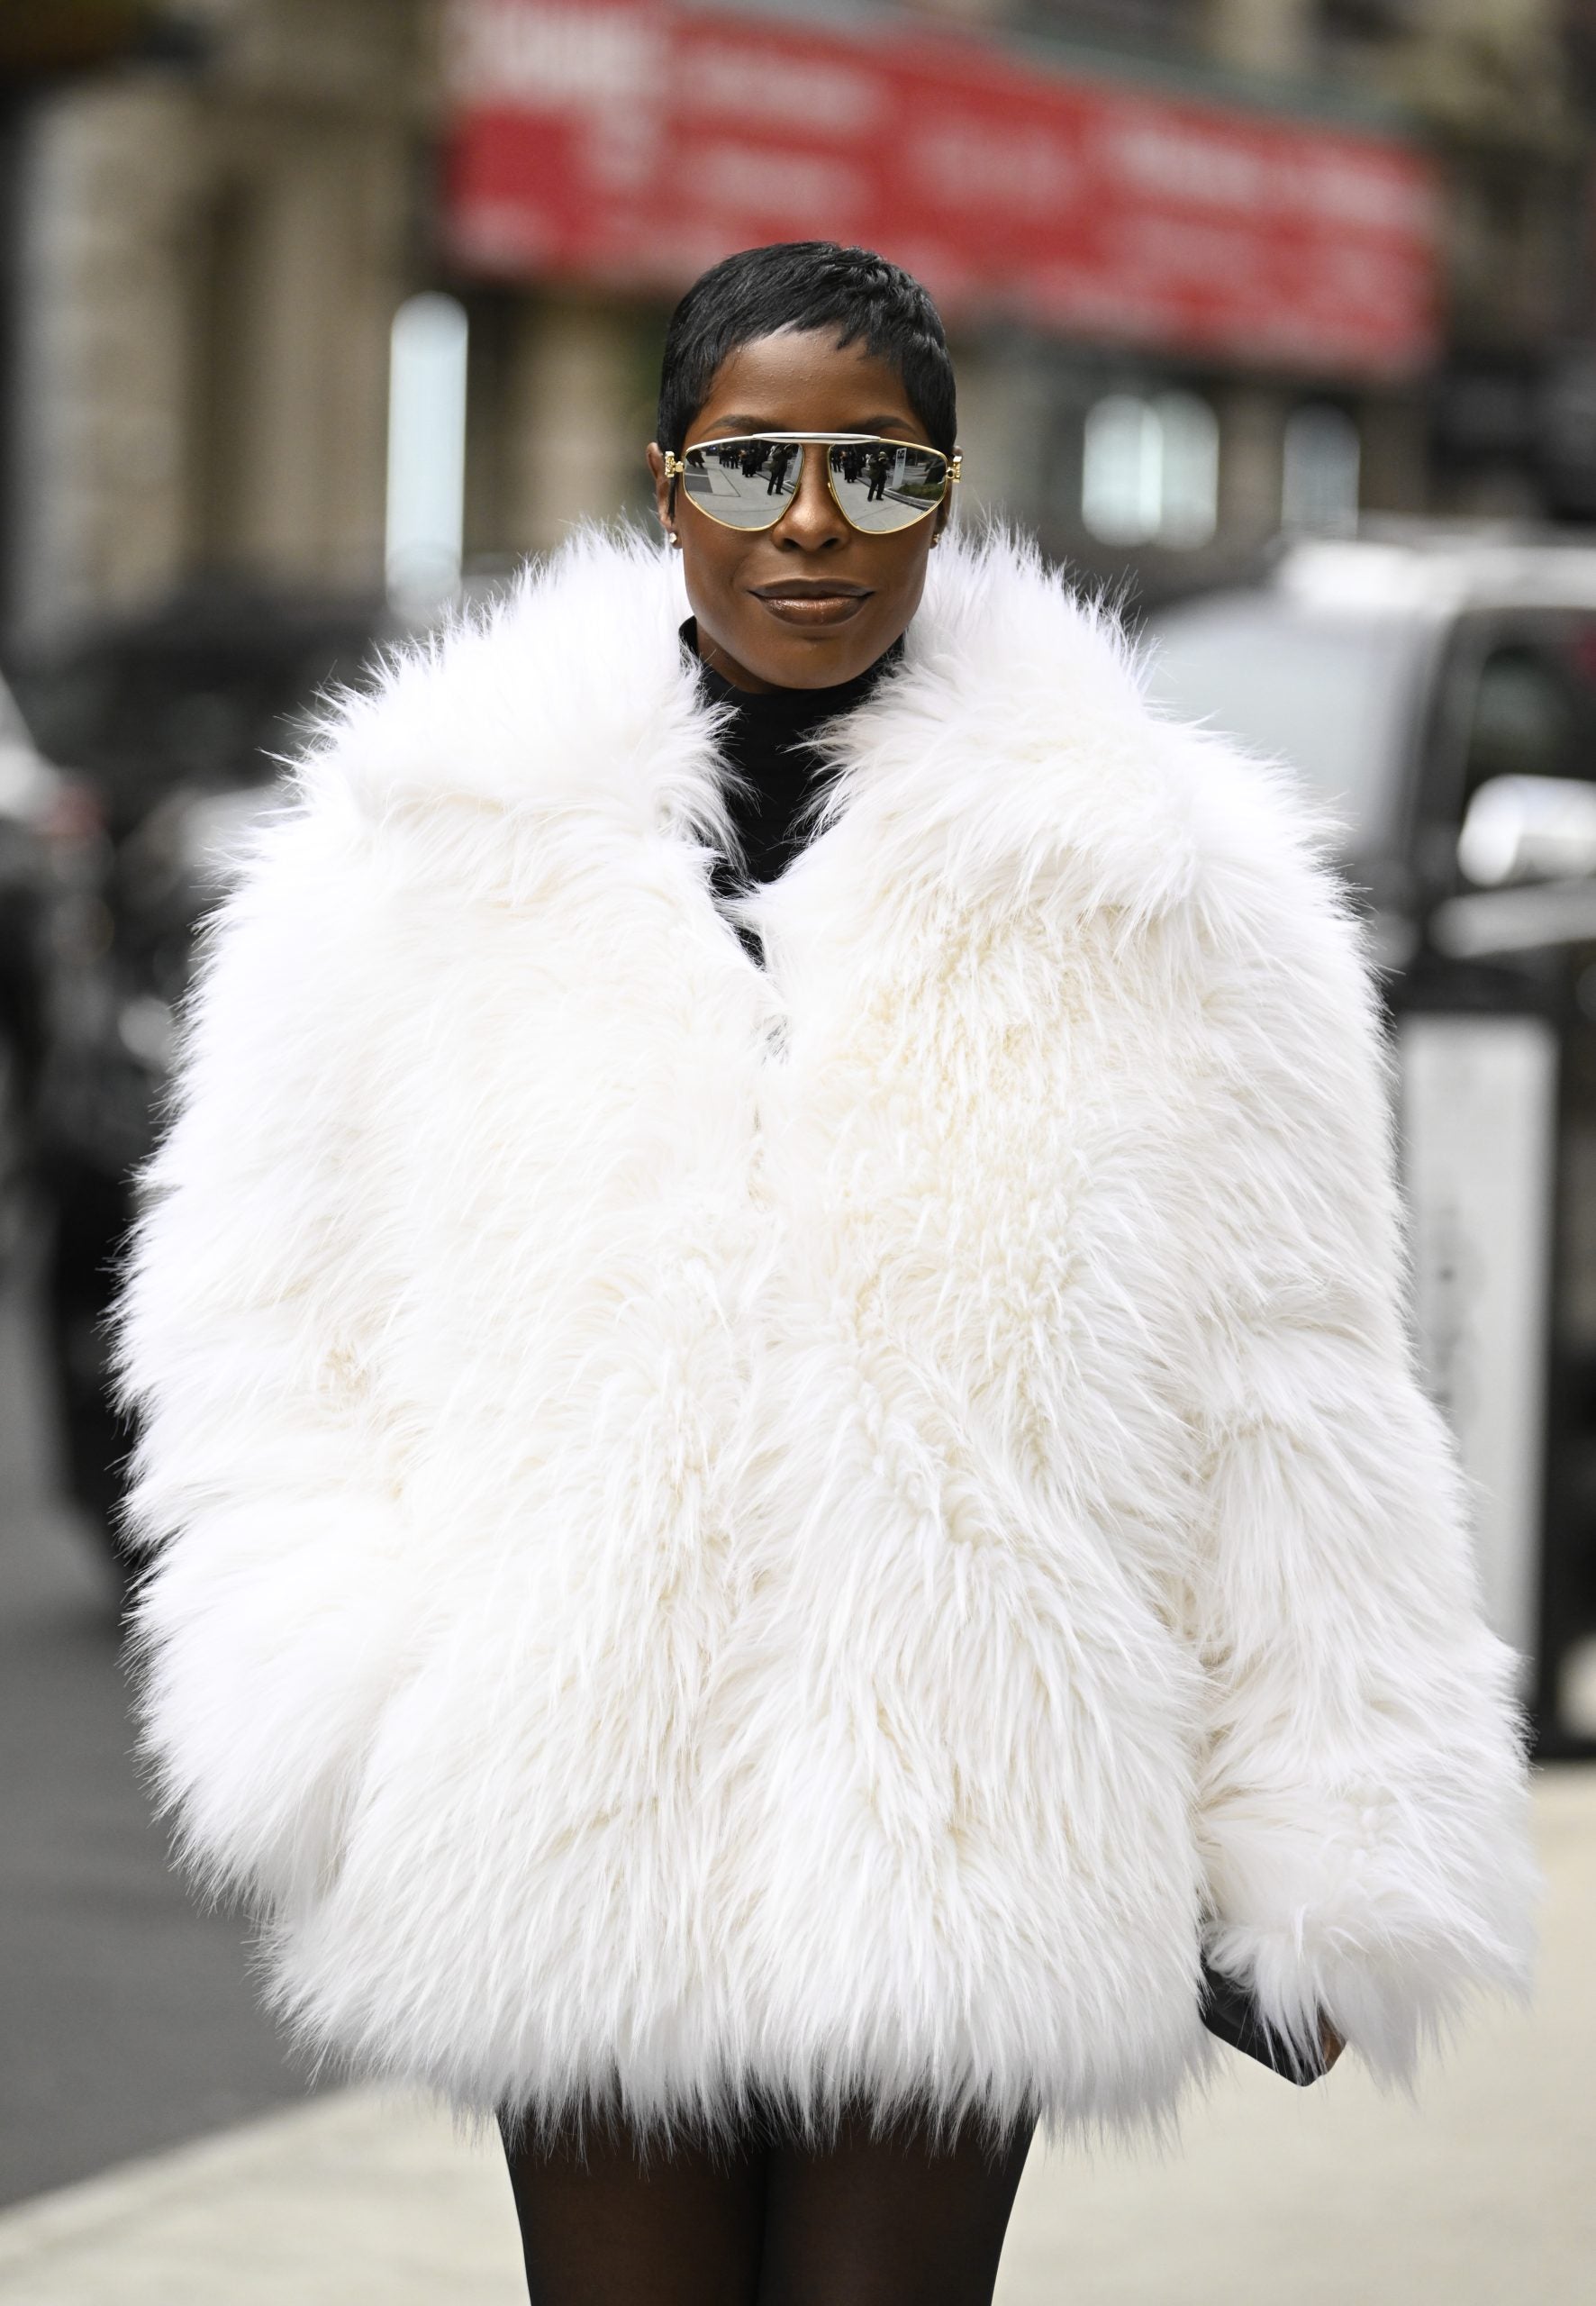 The Street Style Accessories Trending Hard Right Now